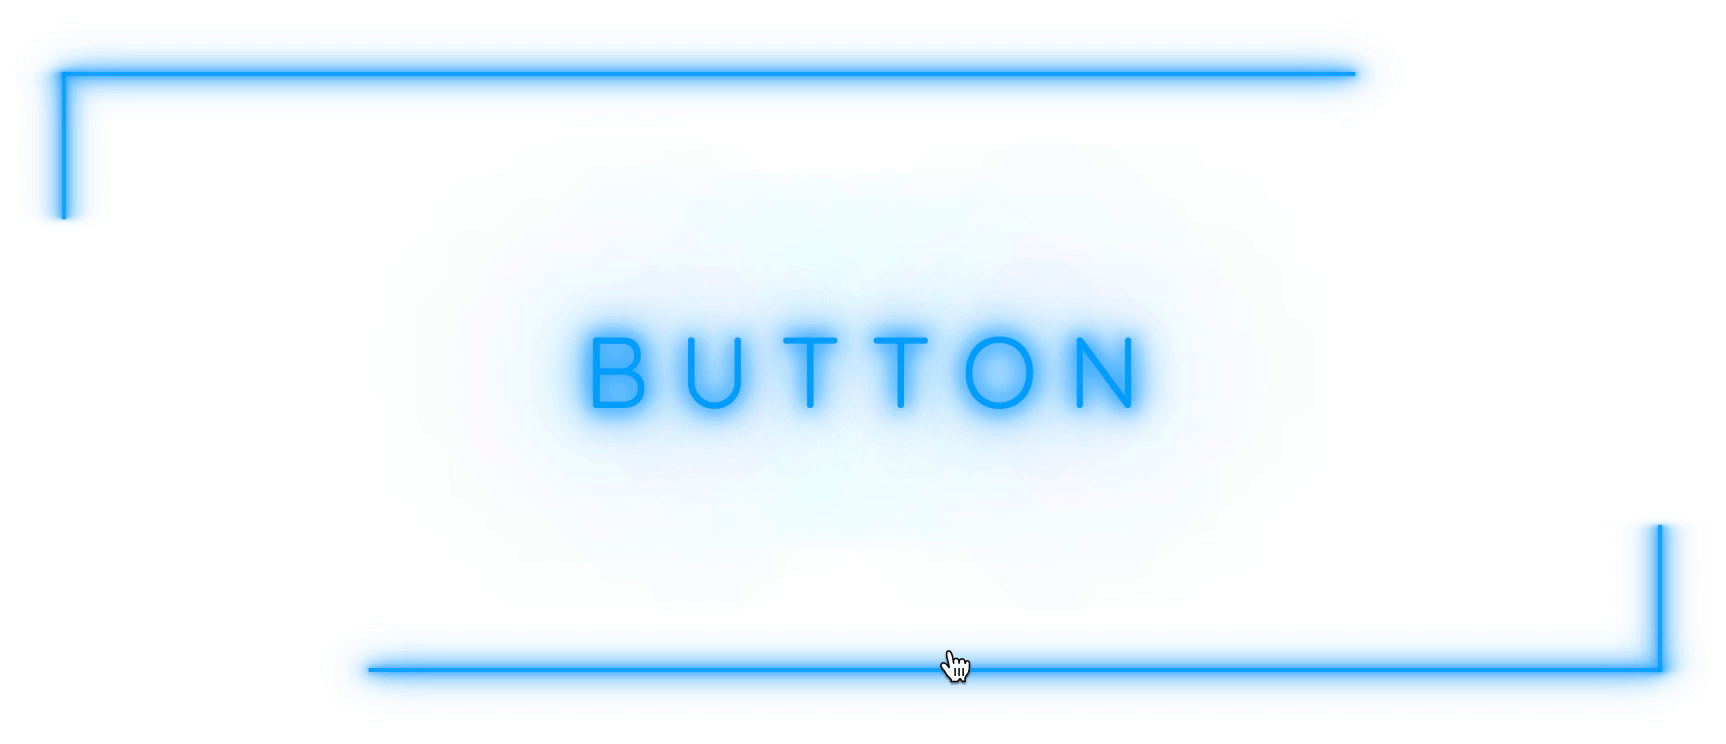 How to Make a Customizable SCSS/CSS Button with an Animated Glowing Border